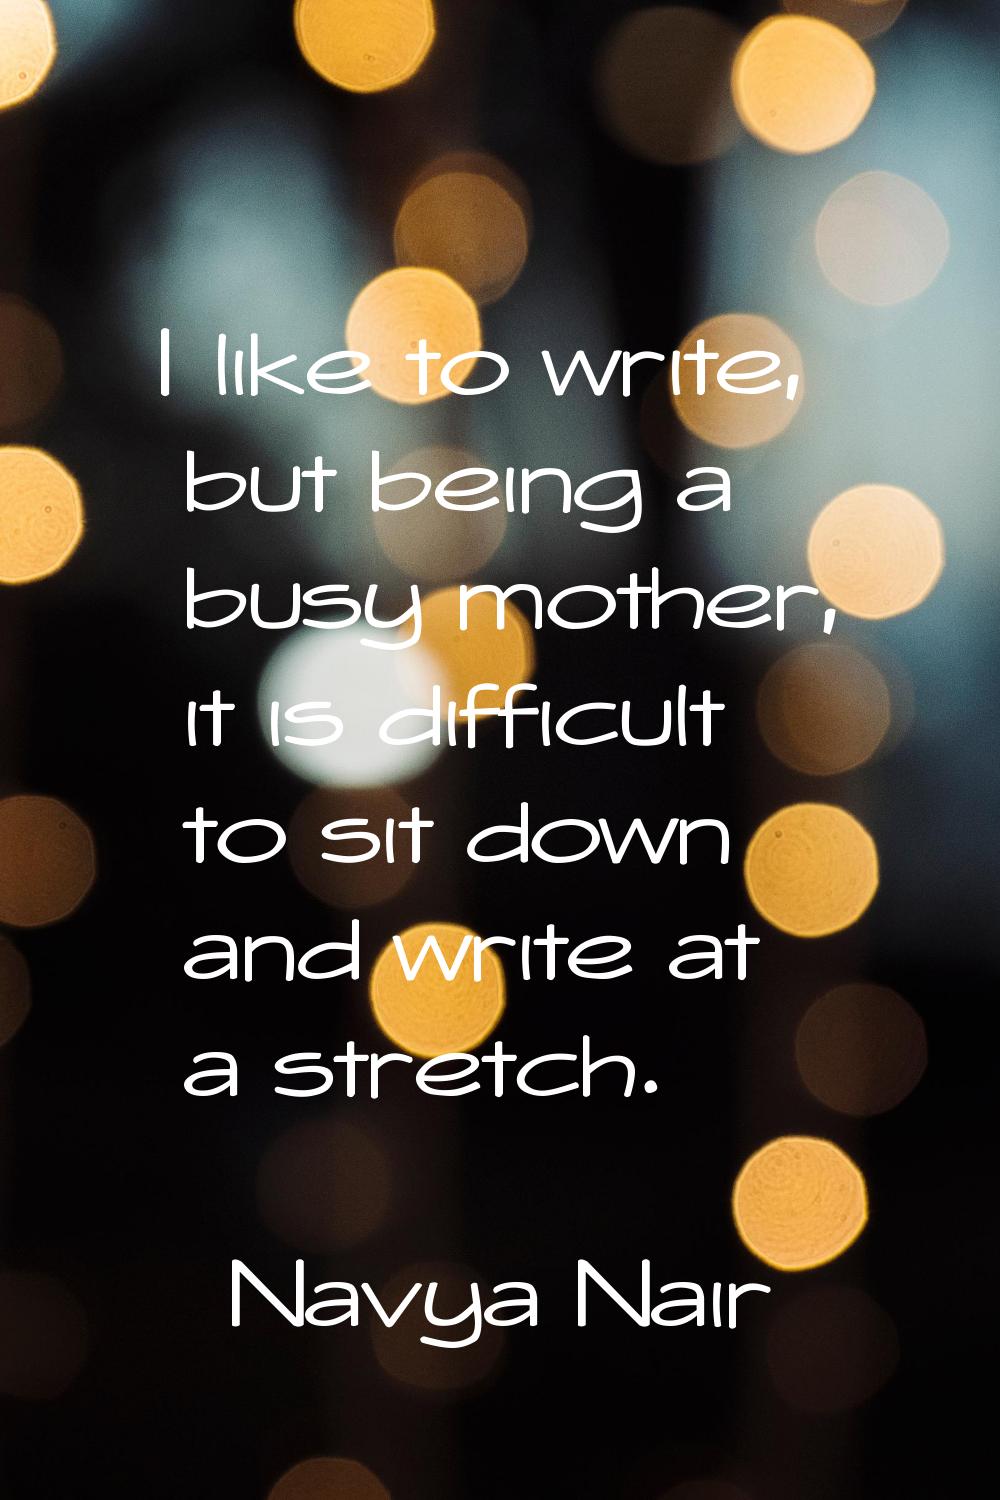 I like to write, but being a busy mother, it is difficult to sit down and write at a stretch.